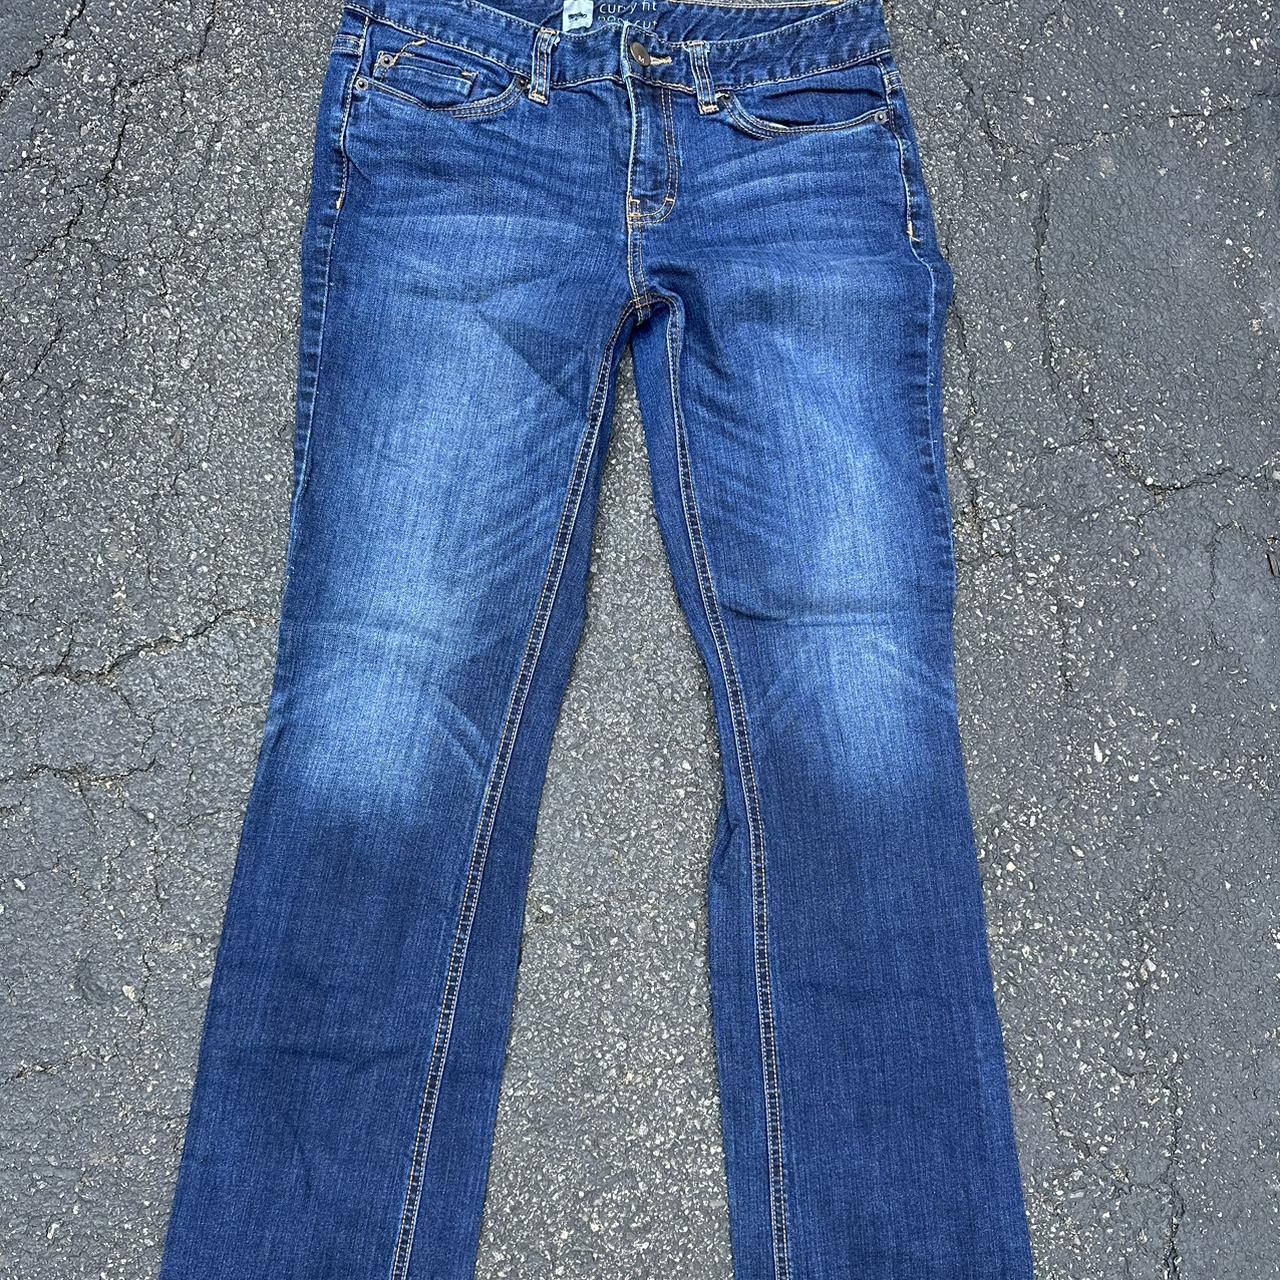 Bootcut Woman’s Jeans Jeans are in good condition,... - Depop